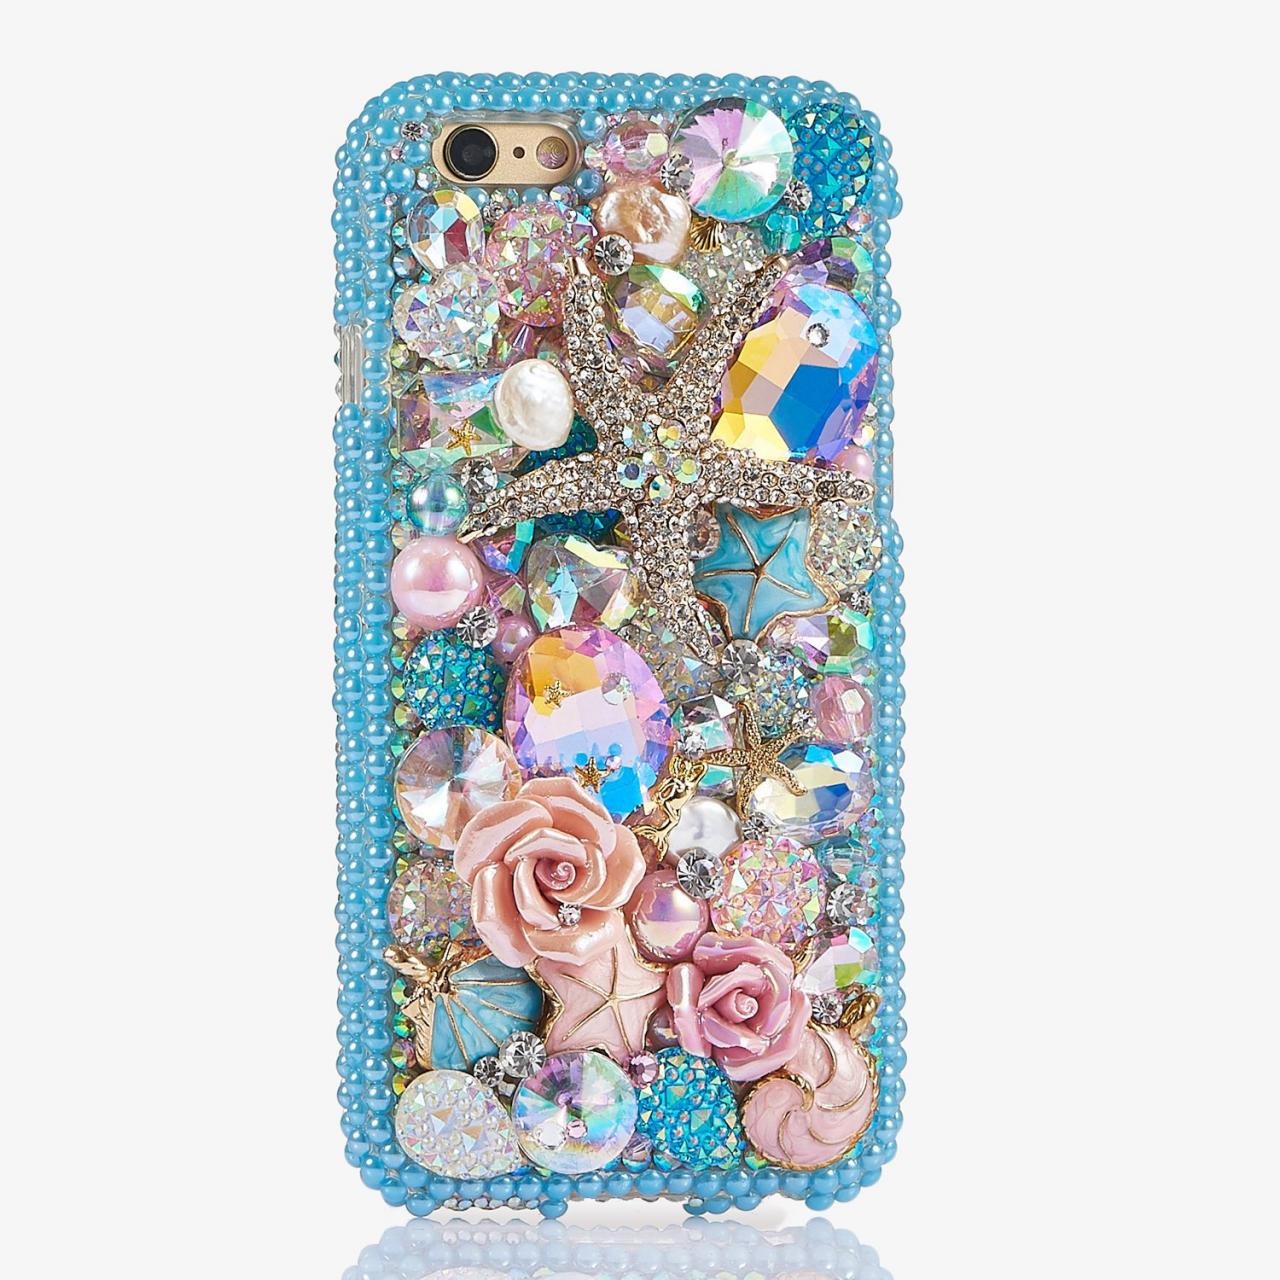 Aqua Blue Pearls Reef Sea Star Roses Genuine Crystals Diamond Sparkle Bling Case For iPhone X XS Max XR 7 8 Plus Samsung Galaxy S9 Note 9